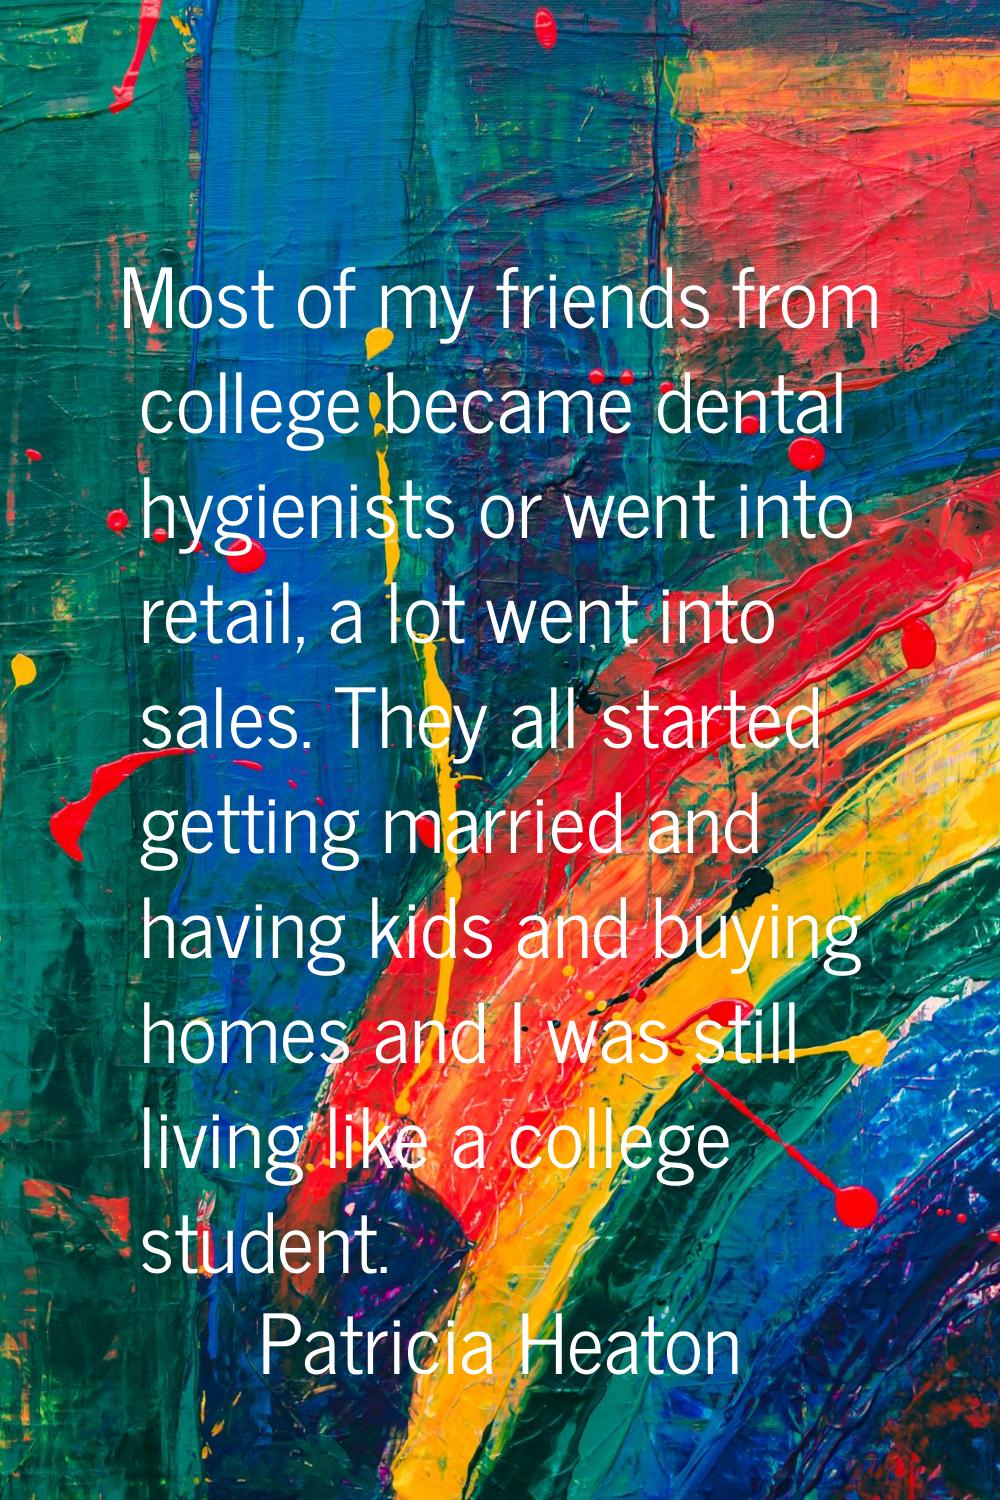 Most of my friends from college became dental hygienists or went into retail, a lot went into sales